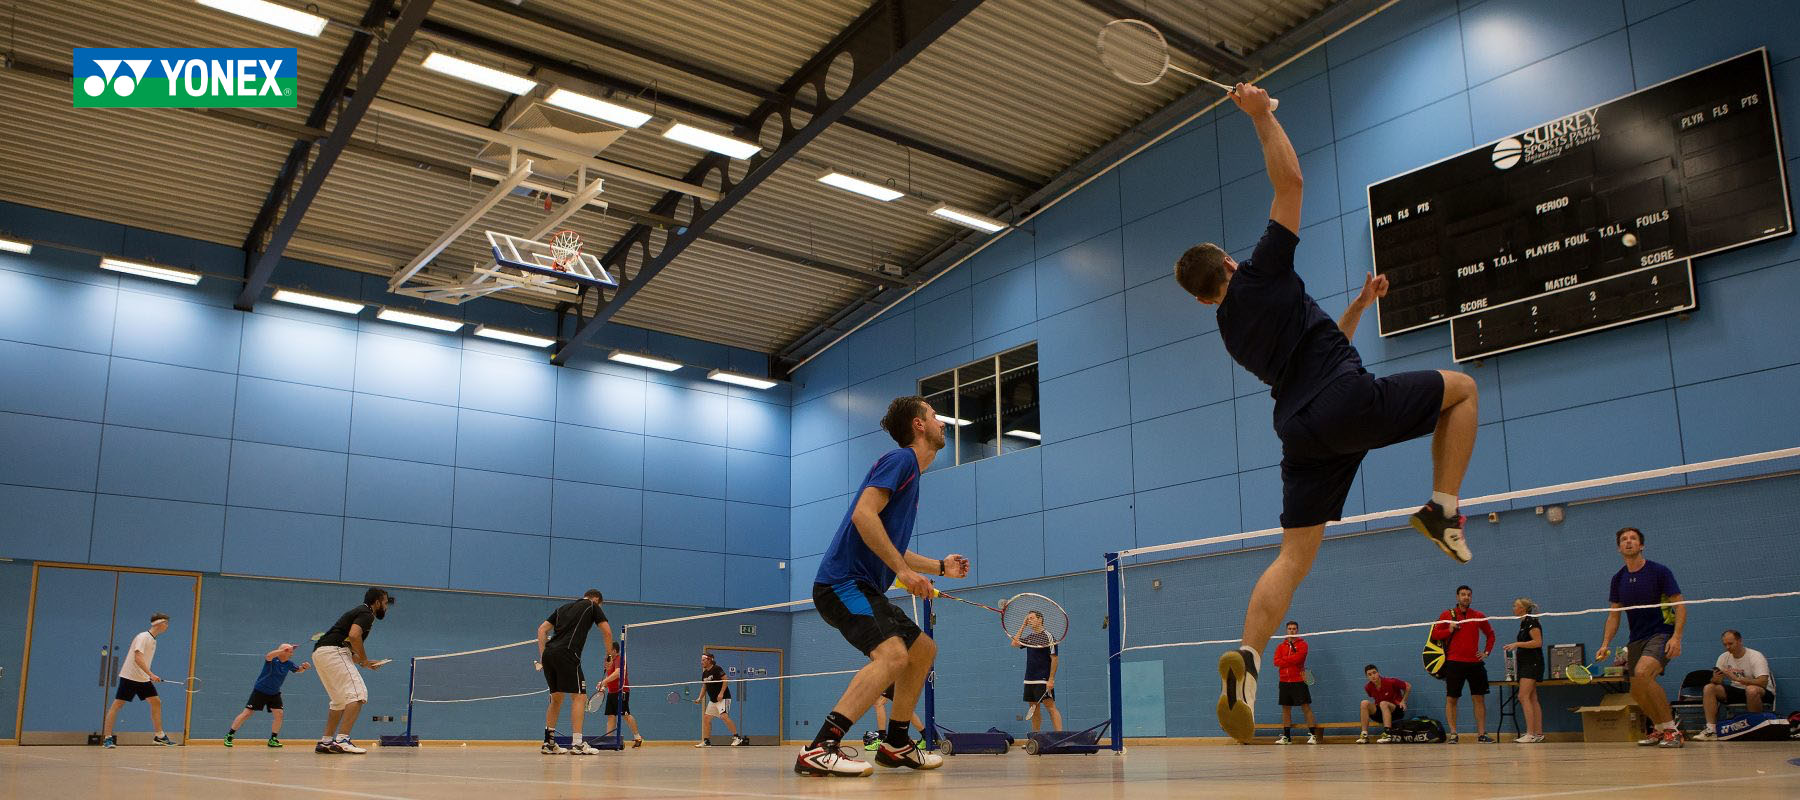 2 a side badminton players in action on the court at Surrey Sports Park